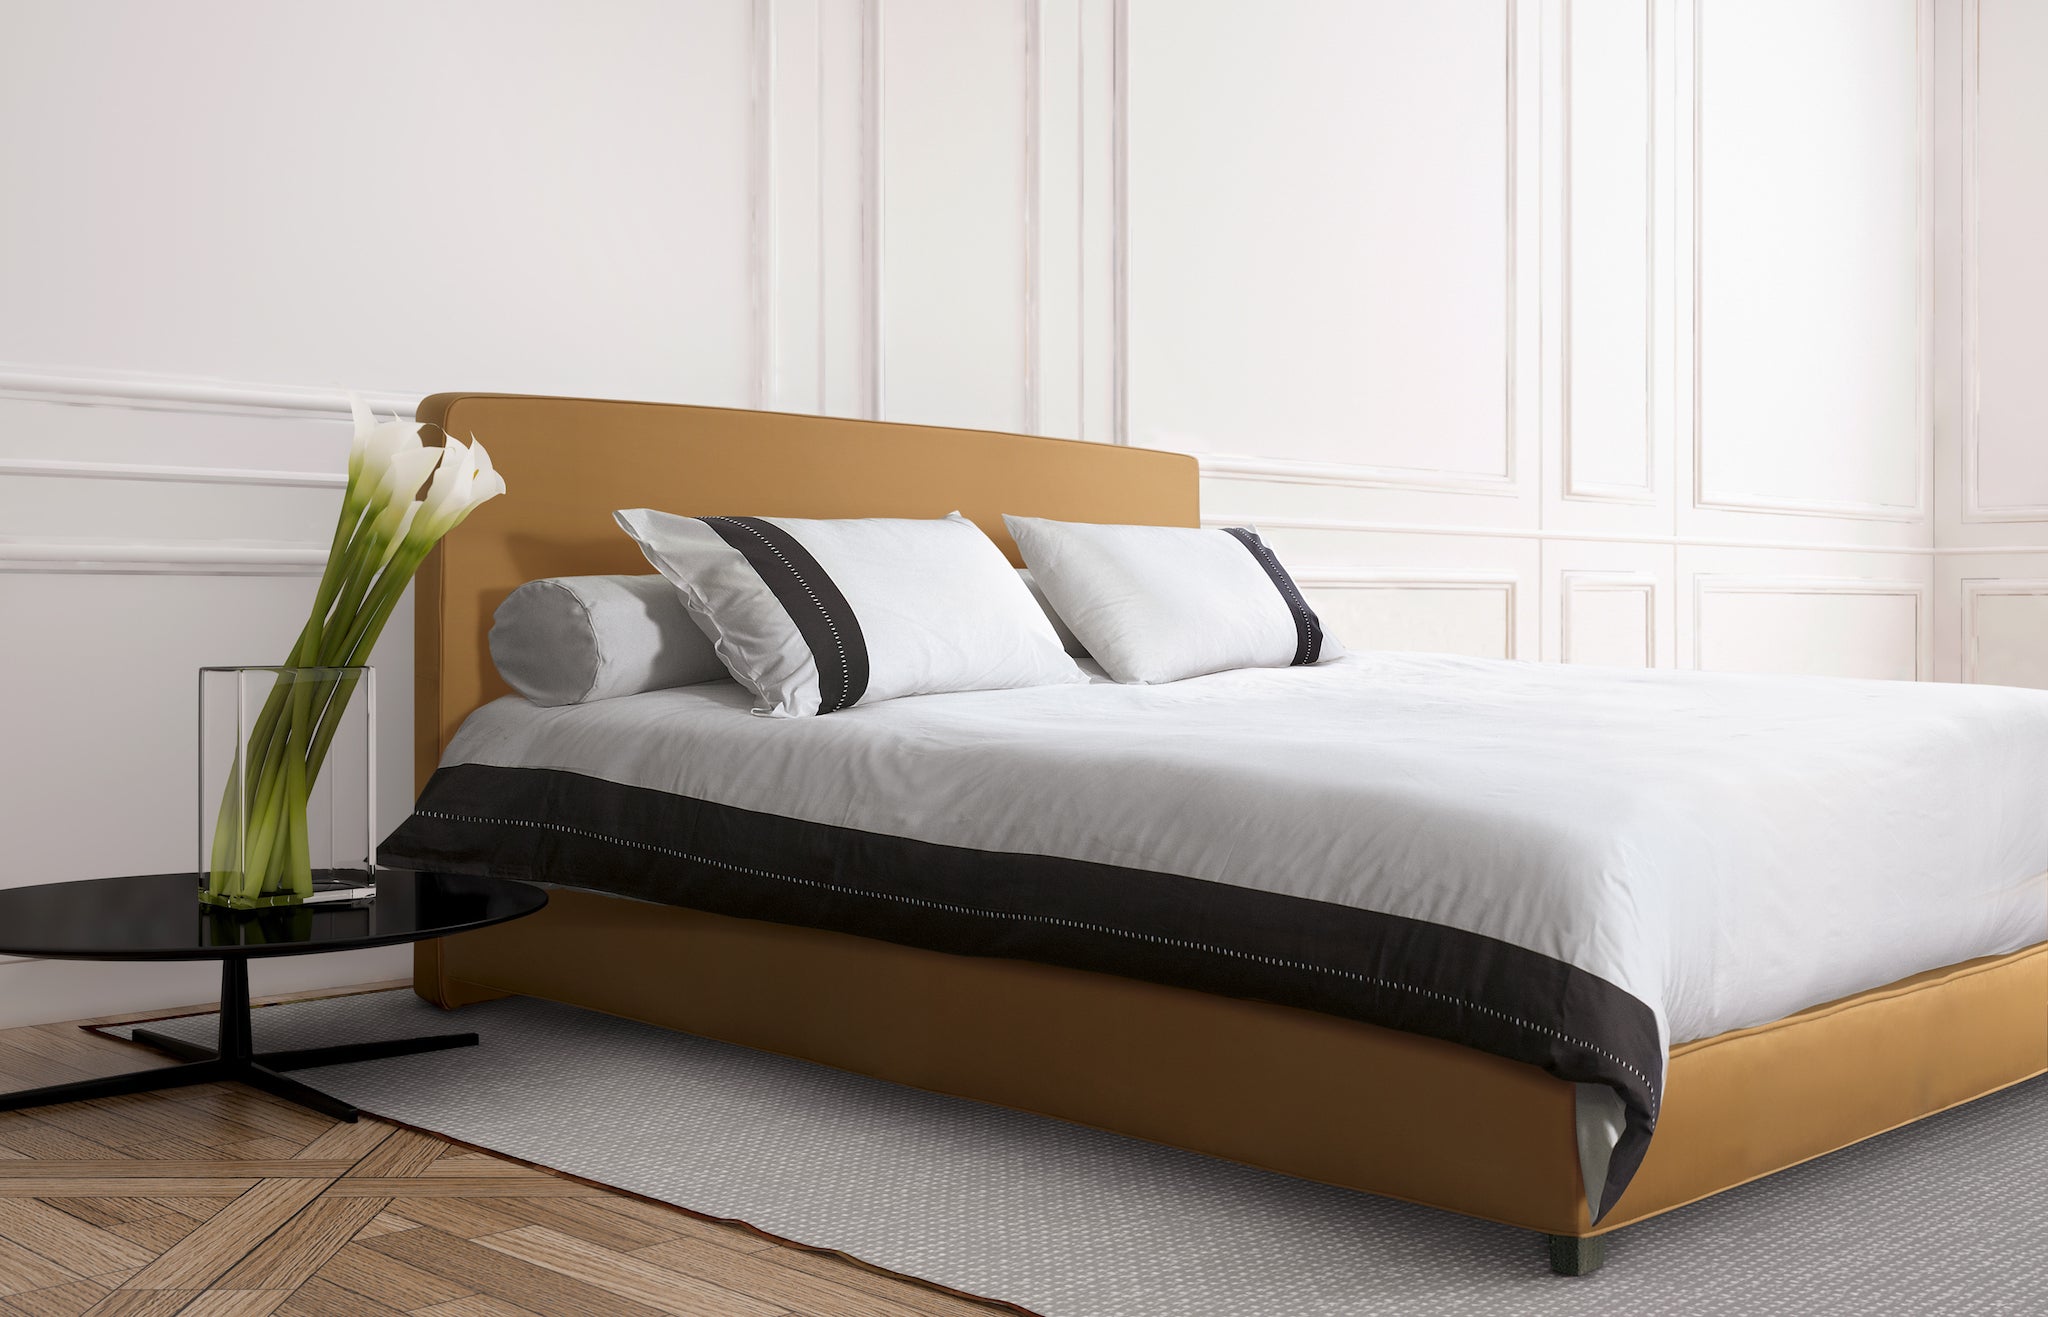 Luxury and precious elegant bed. leather headboard. Italian bed. handmade with natural materials. Made in italy.